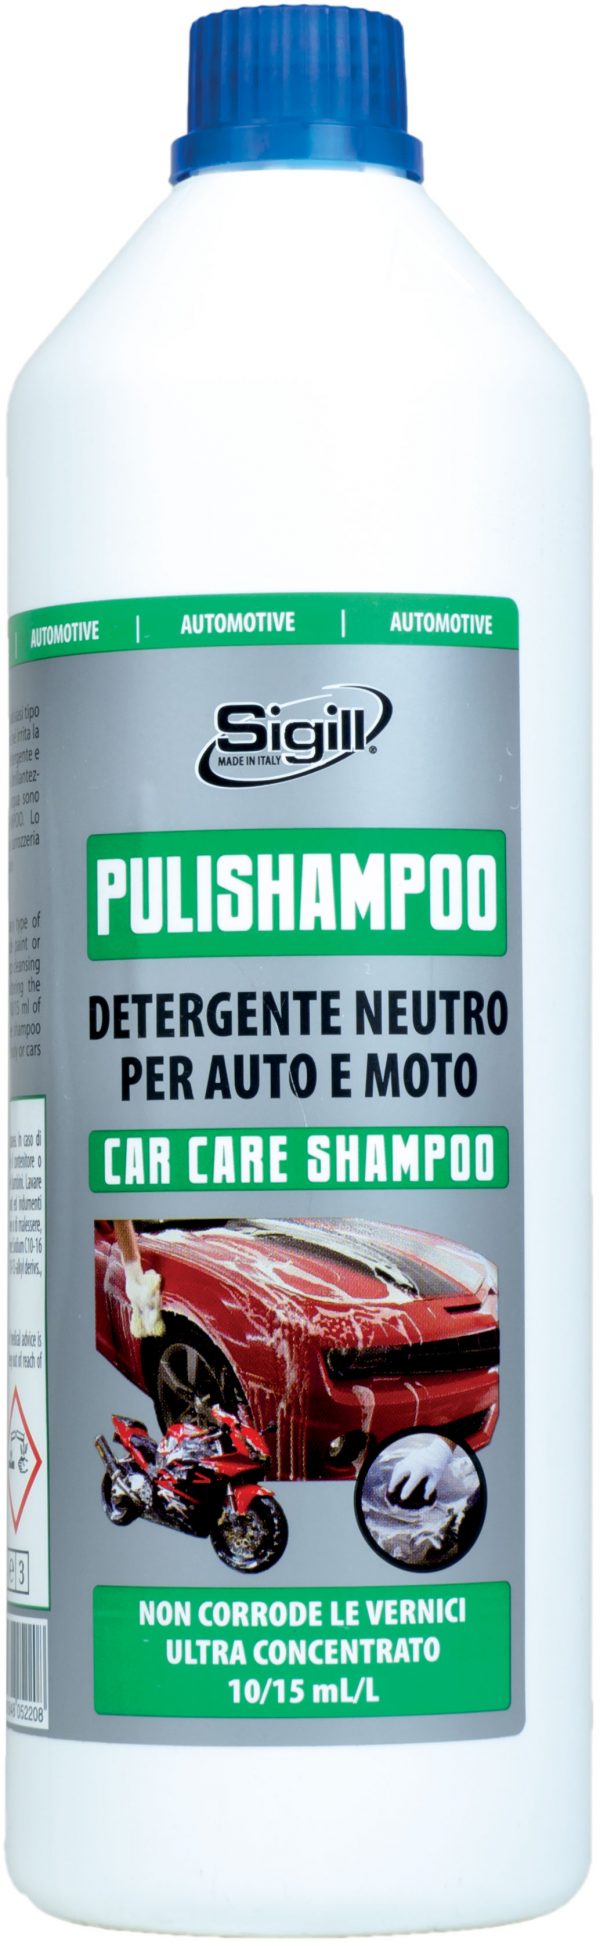 Neutral detergent shampoo for any type of vehicle